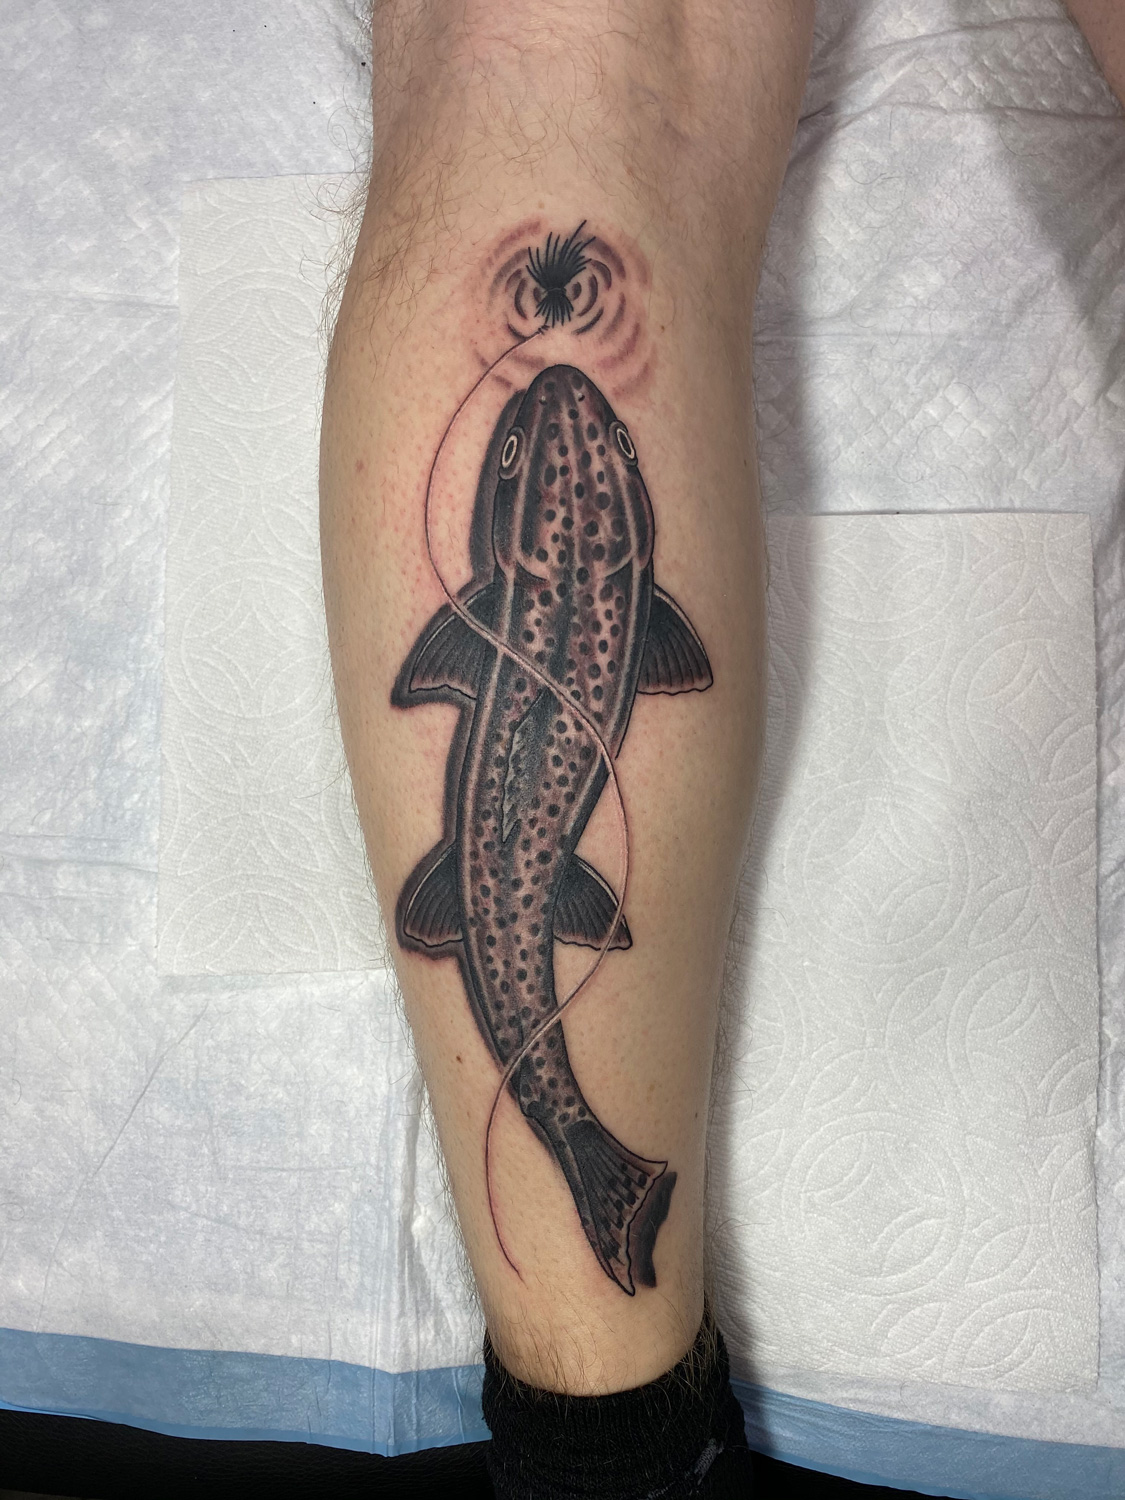 murder of crows tattoo on Twitter 2nd pass over this cover up  Partially  healedfresh this fly fishing theme that wraps around his whole lower  calf coverup tattoo tattoos blackandgrey blackandgreytattoo  saltlakecity 